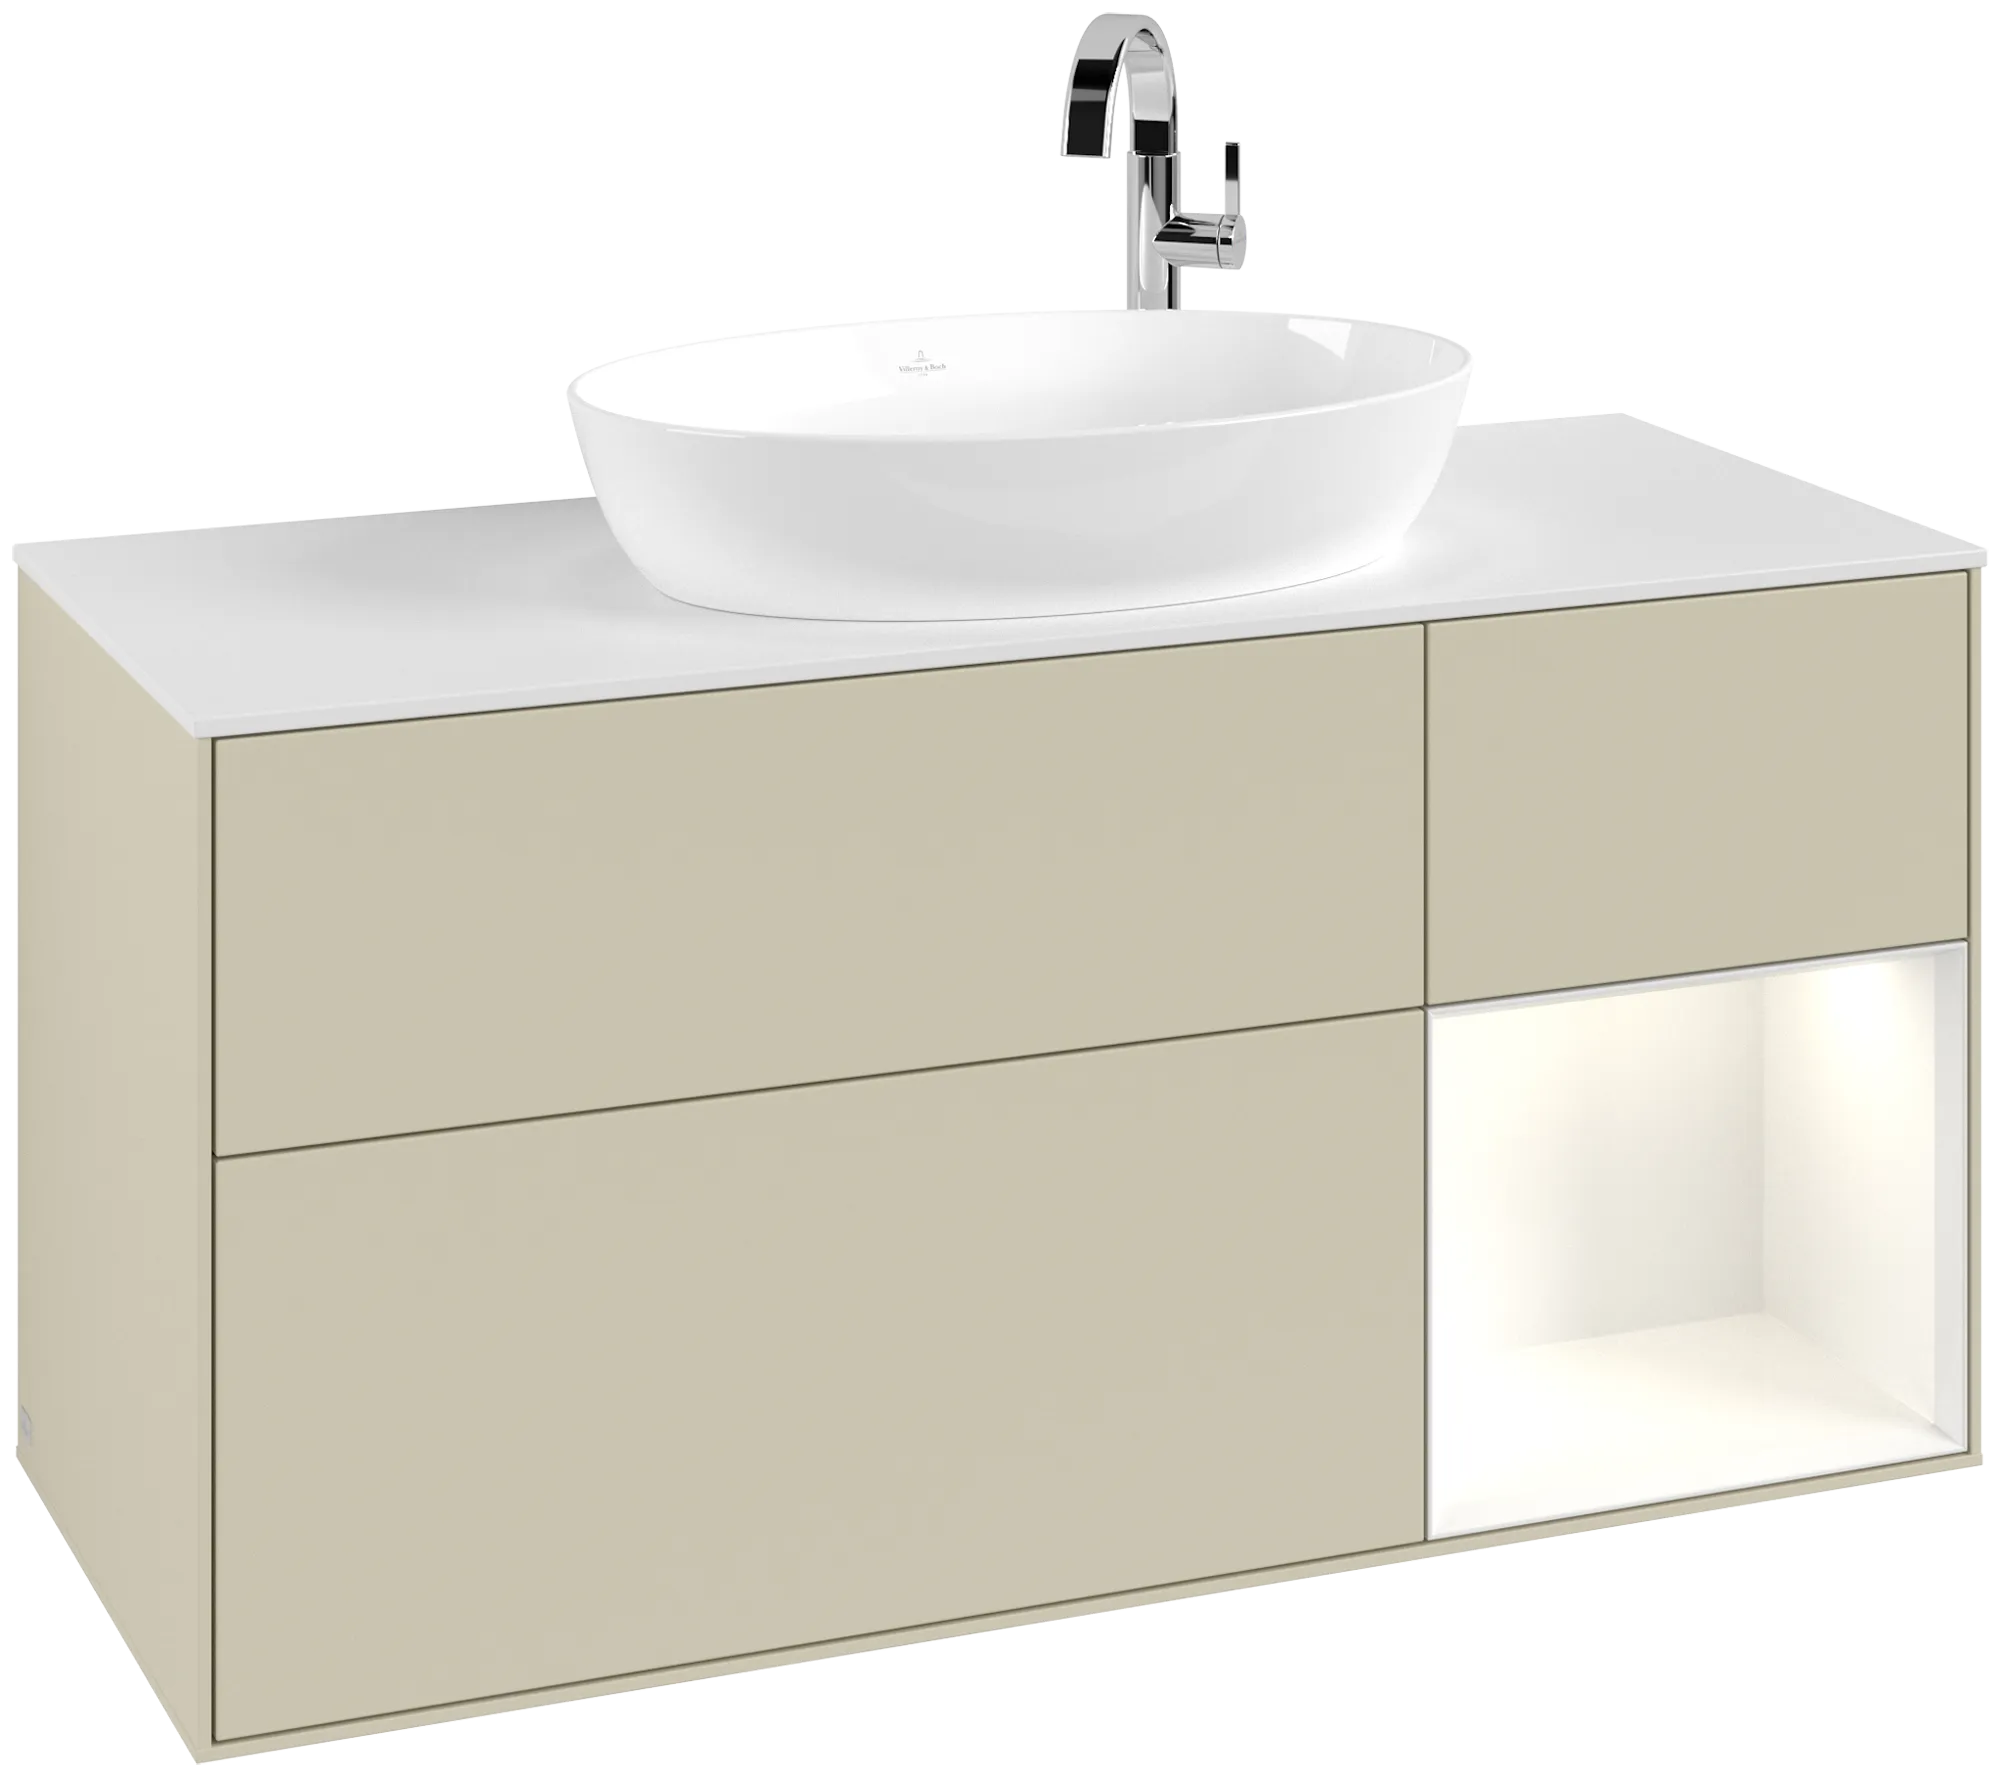 Picture of VILLEROY BOCH Finion Vanity unit, with lighting, 3 pull-out compartments, 1200 x 603 x 501 mm, Silk Grey Matt Lacquer / Glossy White Lacquer / Glass White Matt #G951GFHJ